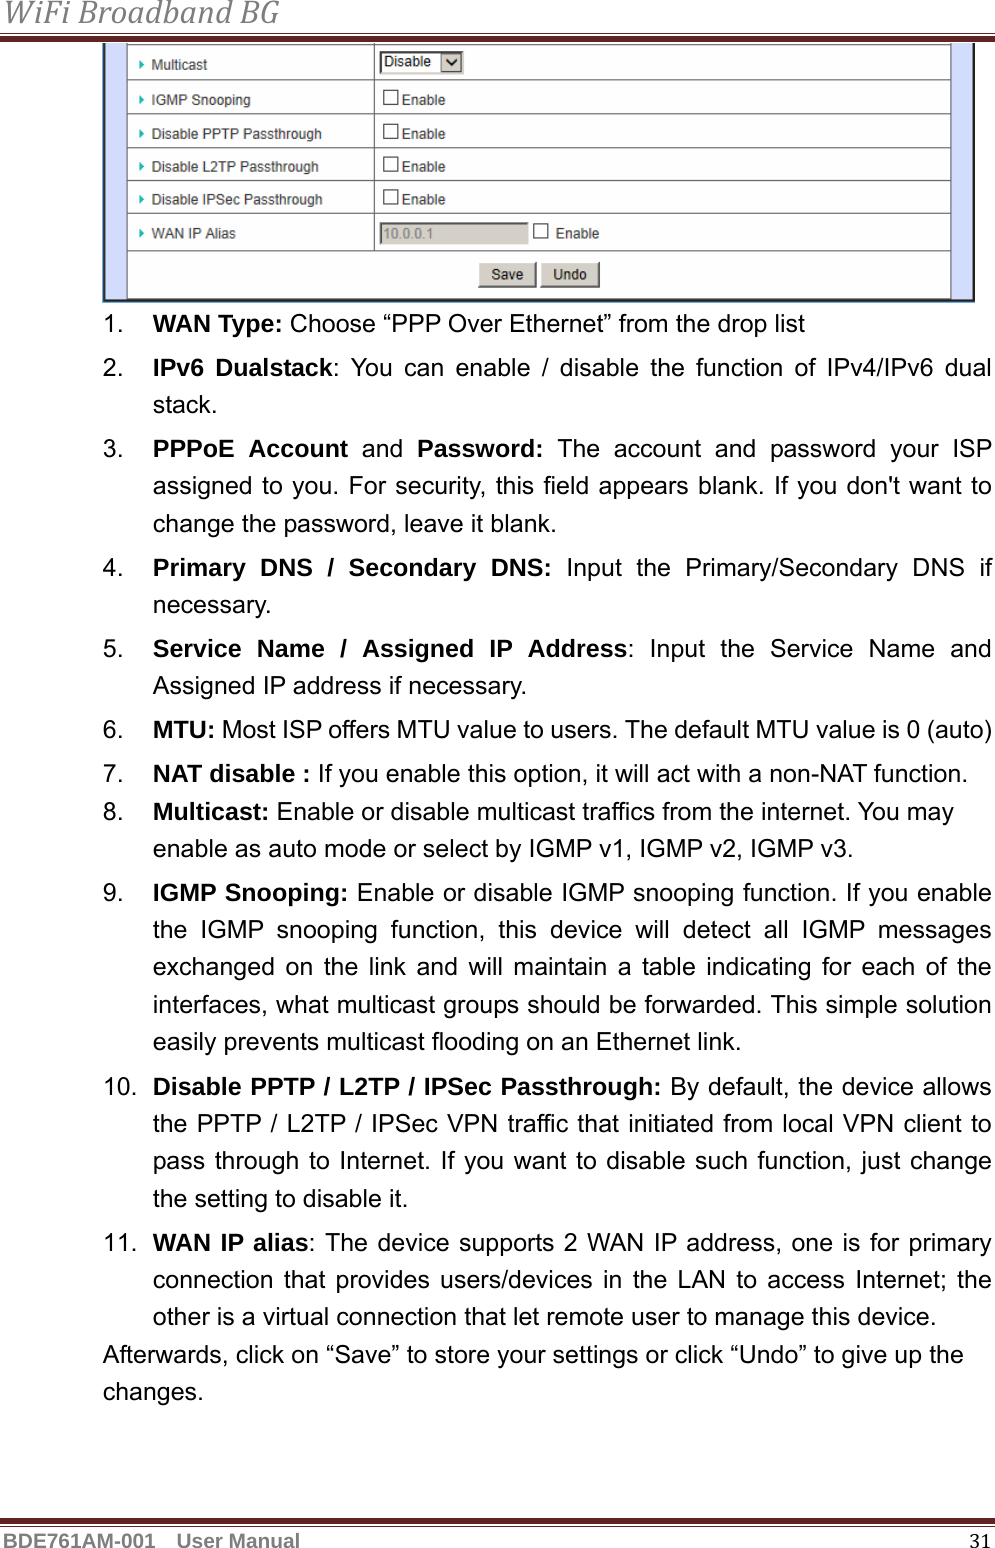 WiFiBroadbandBGBDE761AM-001  User Manual   31 1.  WAN Type: Choose “PPP Over Ethernet” from the drop list 2.  IPv6 Dualstack: You can enable / disable the function of IPv4/IPv6 dual stack. 3.  PPPoE Account and Password:  The account and password your ISP assigned to you. For security, this field appears blank. If you don&apos;t want to change the password, leave it blank. 4.  Primary DNS / Secondary DNS: Input the Primary/Secondary DNS if necessary. 5.  Service Name / Assigned IP Address: Input the Service Name and Assigned IP address if necessary. 6.  MTU: Most ISP offers MTU value to users. The default MTU value is 0 (auto) 7.  NAT disable : If you enable this option, it will act with a non-NAT function. 8.  Multicast: Enable or disable multicast traffics from the internet. You may enable as auto mode or select by IGMP v1, IGMP v2, IGMP v3. 9.  IGMP Snooping: Enable or disable IGMP snooping function. If you enable the IGMP snooping function, this device will detect all IGMP messages exchanged on the link and will maintain a table indicating for each of the interfaces, what multicast groups should be forwarded. This simple solution easily prevents multicast flooding on an Ethernet link. 10.  Disable PPTP / L2TP / IPSec Passthrough: By default, the device allows the PPTP / L2TP / IPSec VPN traffic that initiated from local VPN client to pass through to Internet. If you want to disable such function, just change the setting to disable it. 11.  WAN IP alias: The device supports 2 WAN IP address, one is for primary connection that provides users/devices in the LAN to access Internet; the other is a virtual connection that let remote user to manage this device. Afterwards, click on “Save” to store your settings or click “Undo” to give up the changes.   